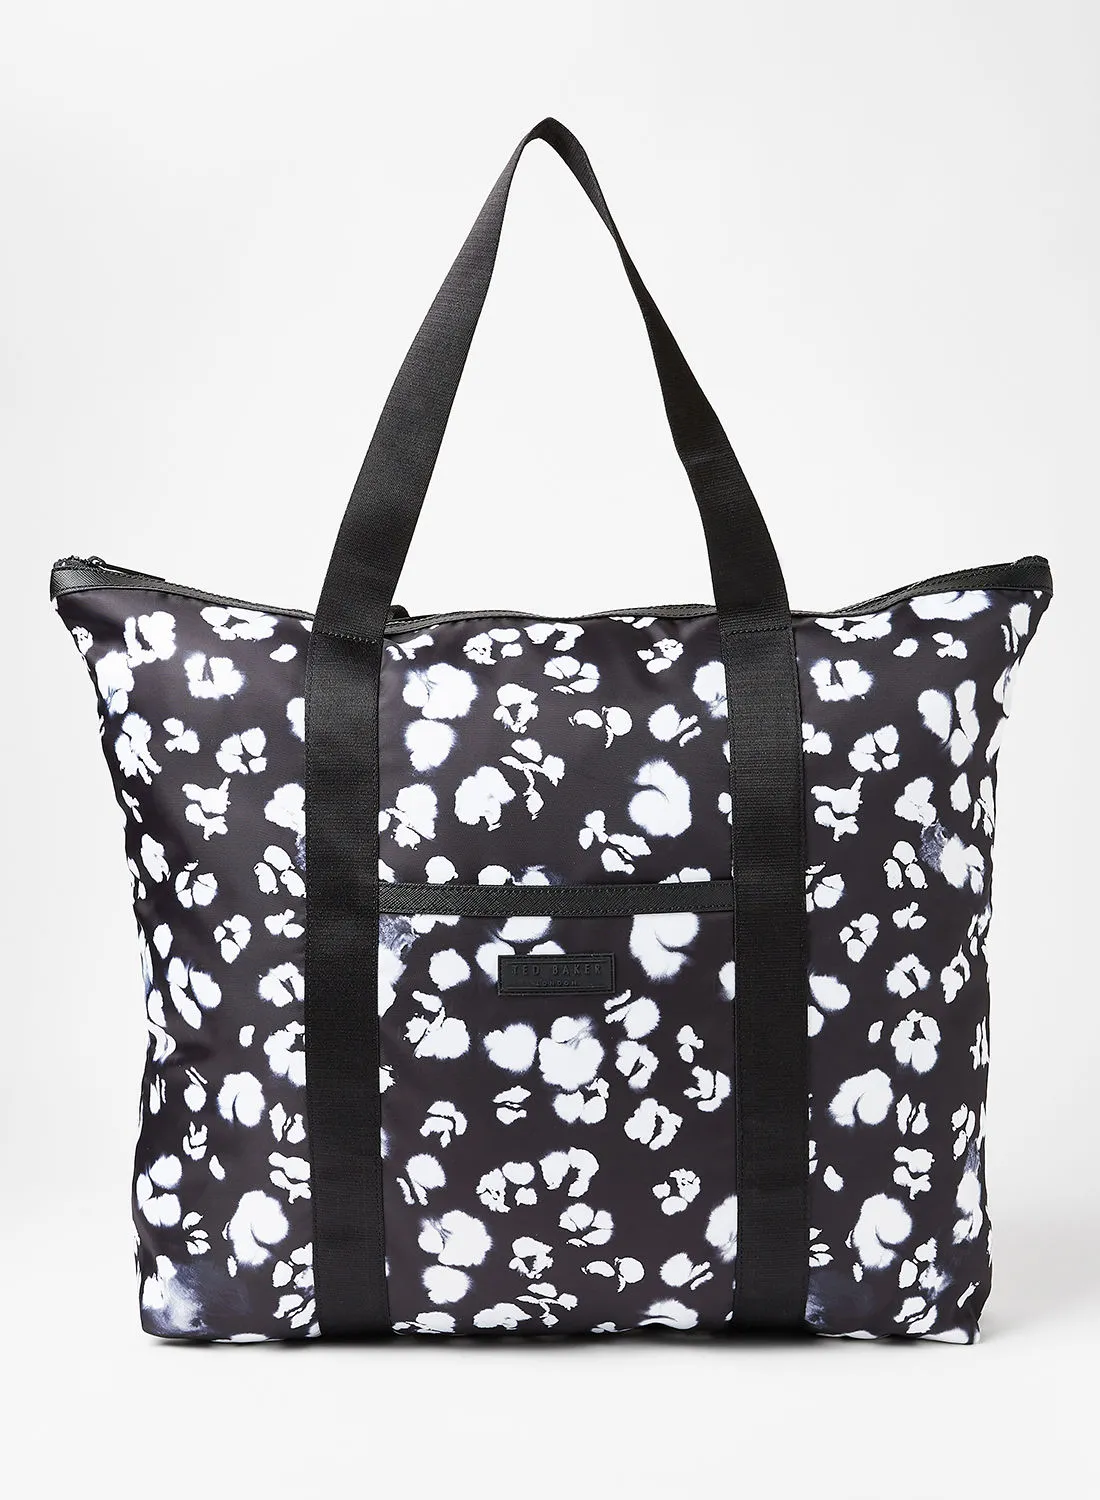 Ted Baker Nocturnal Animal Tote Black/White